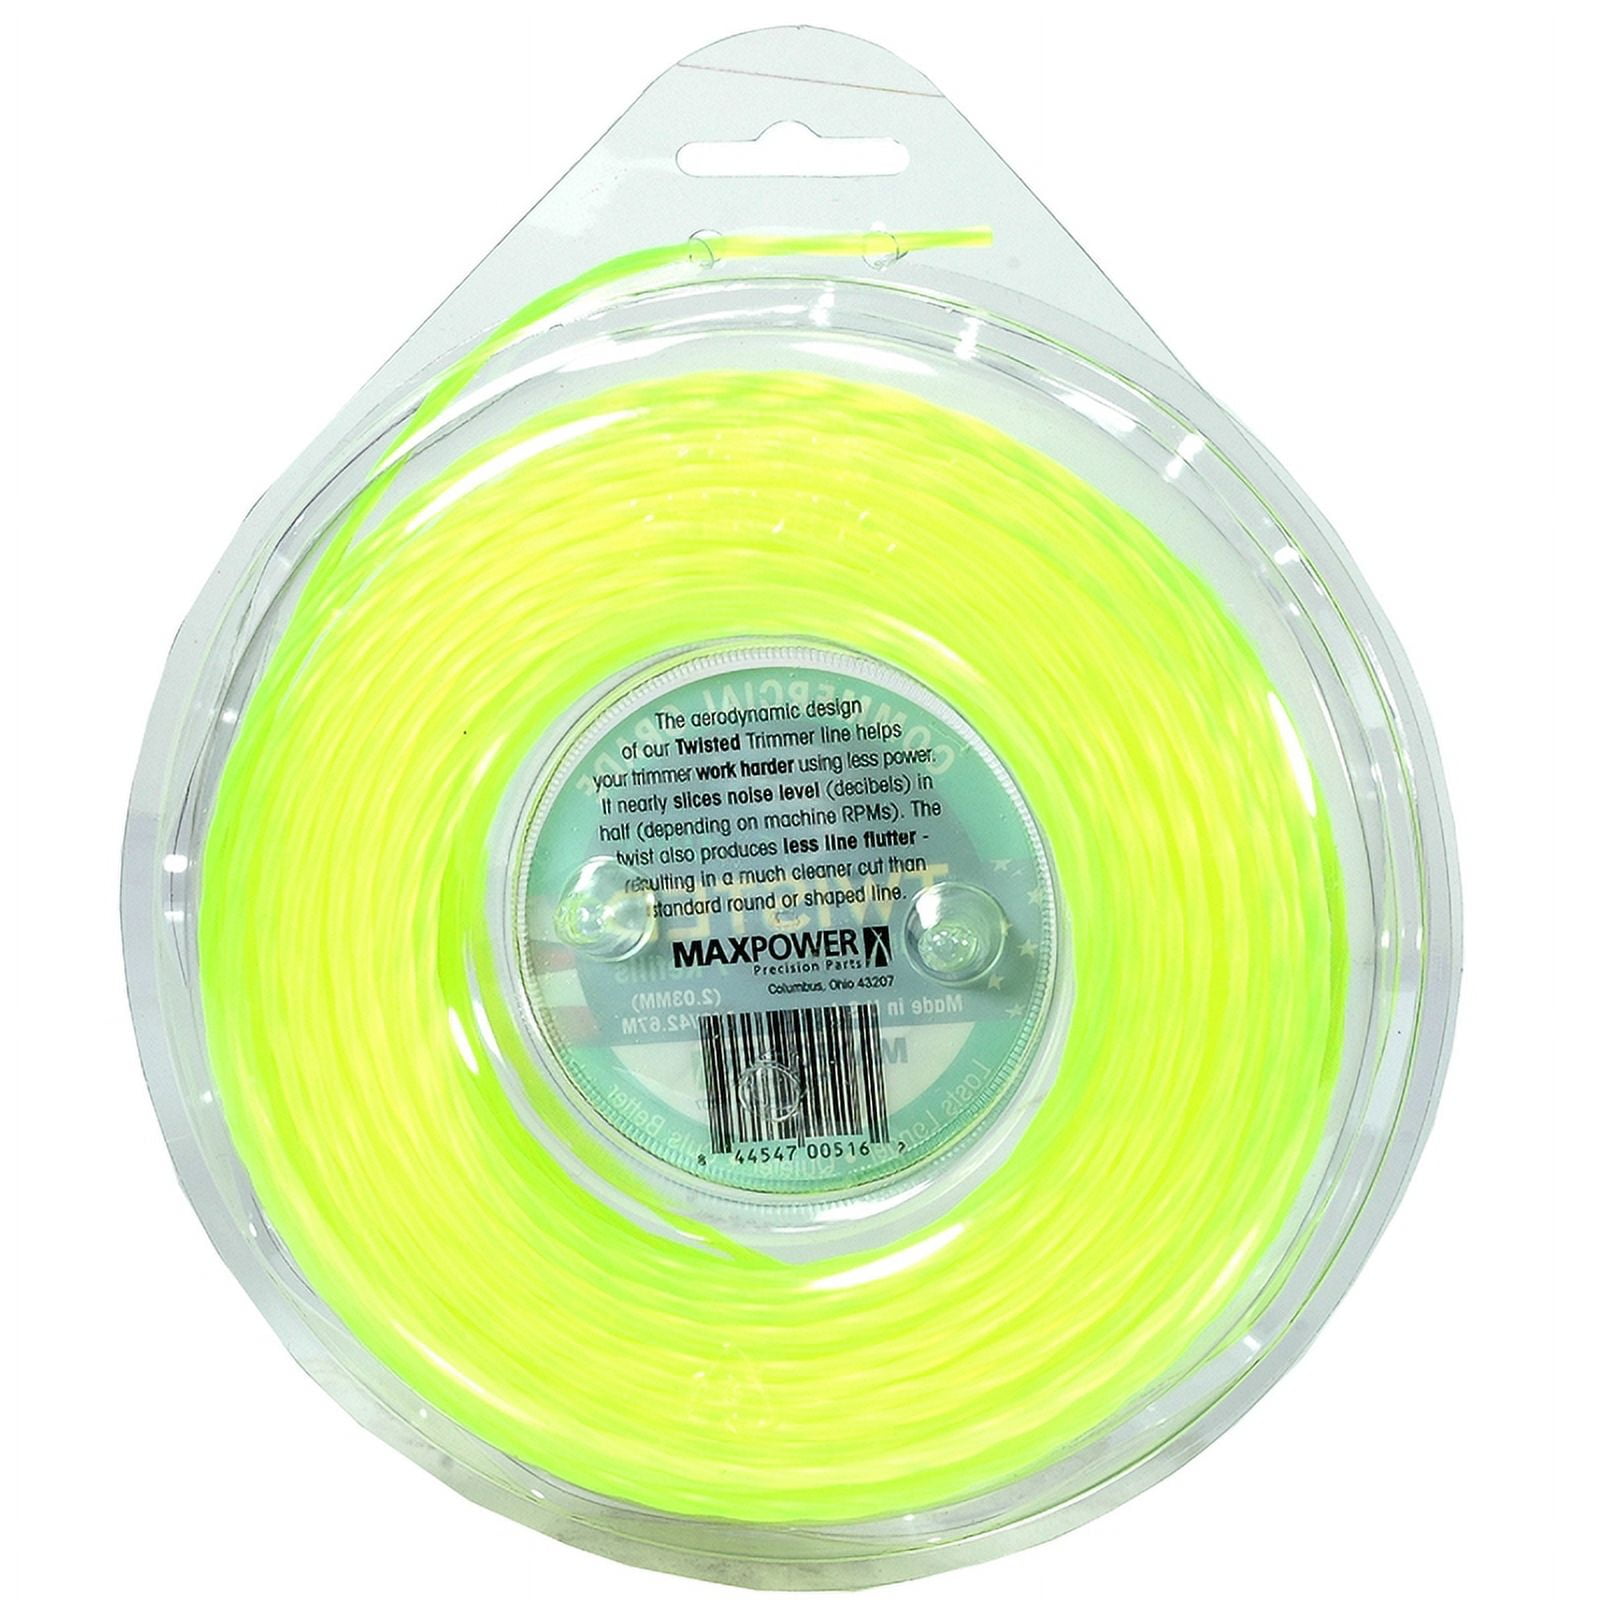 MaxPower Plastic String Trimmer Replacement Spool in the String